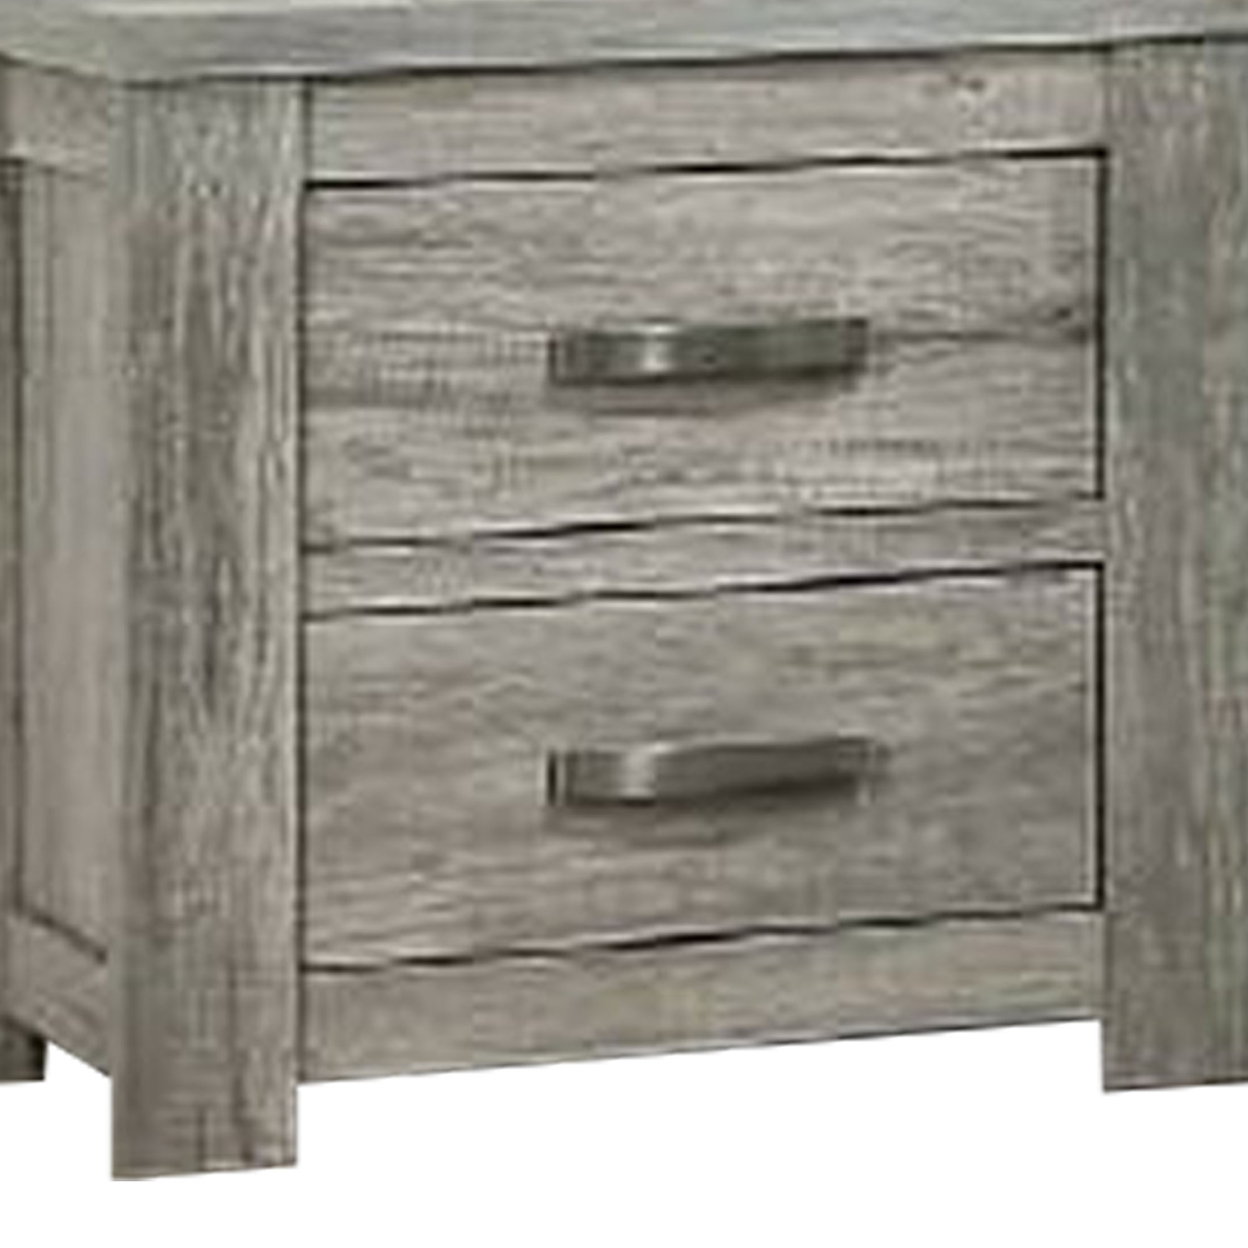 Wooden Nightstand With Two Drawers And Metal Bar Handles, Gray- Saltoro Sherpi